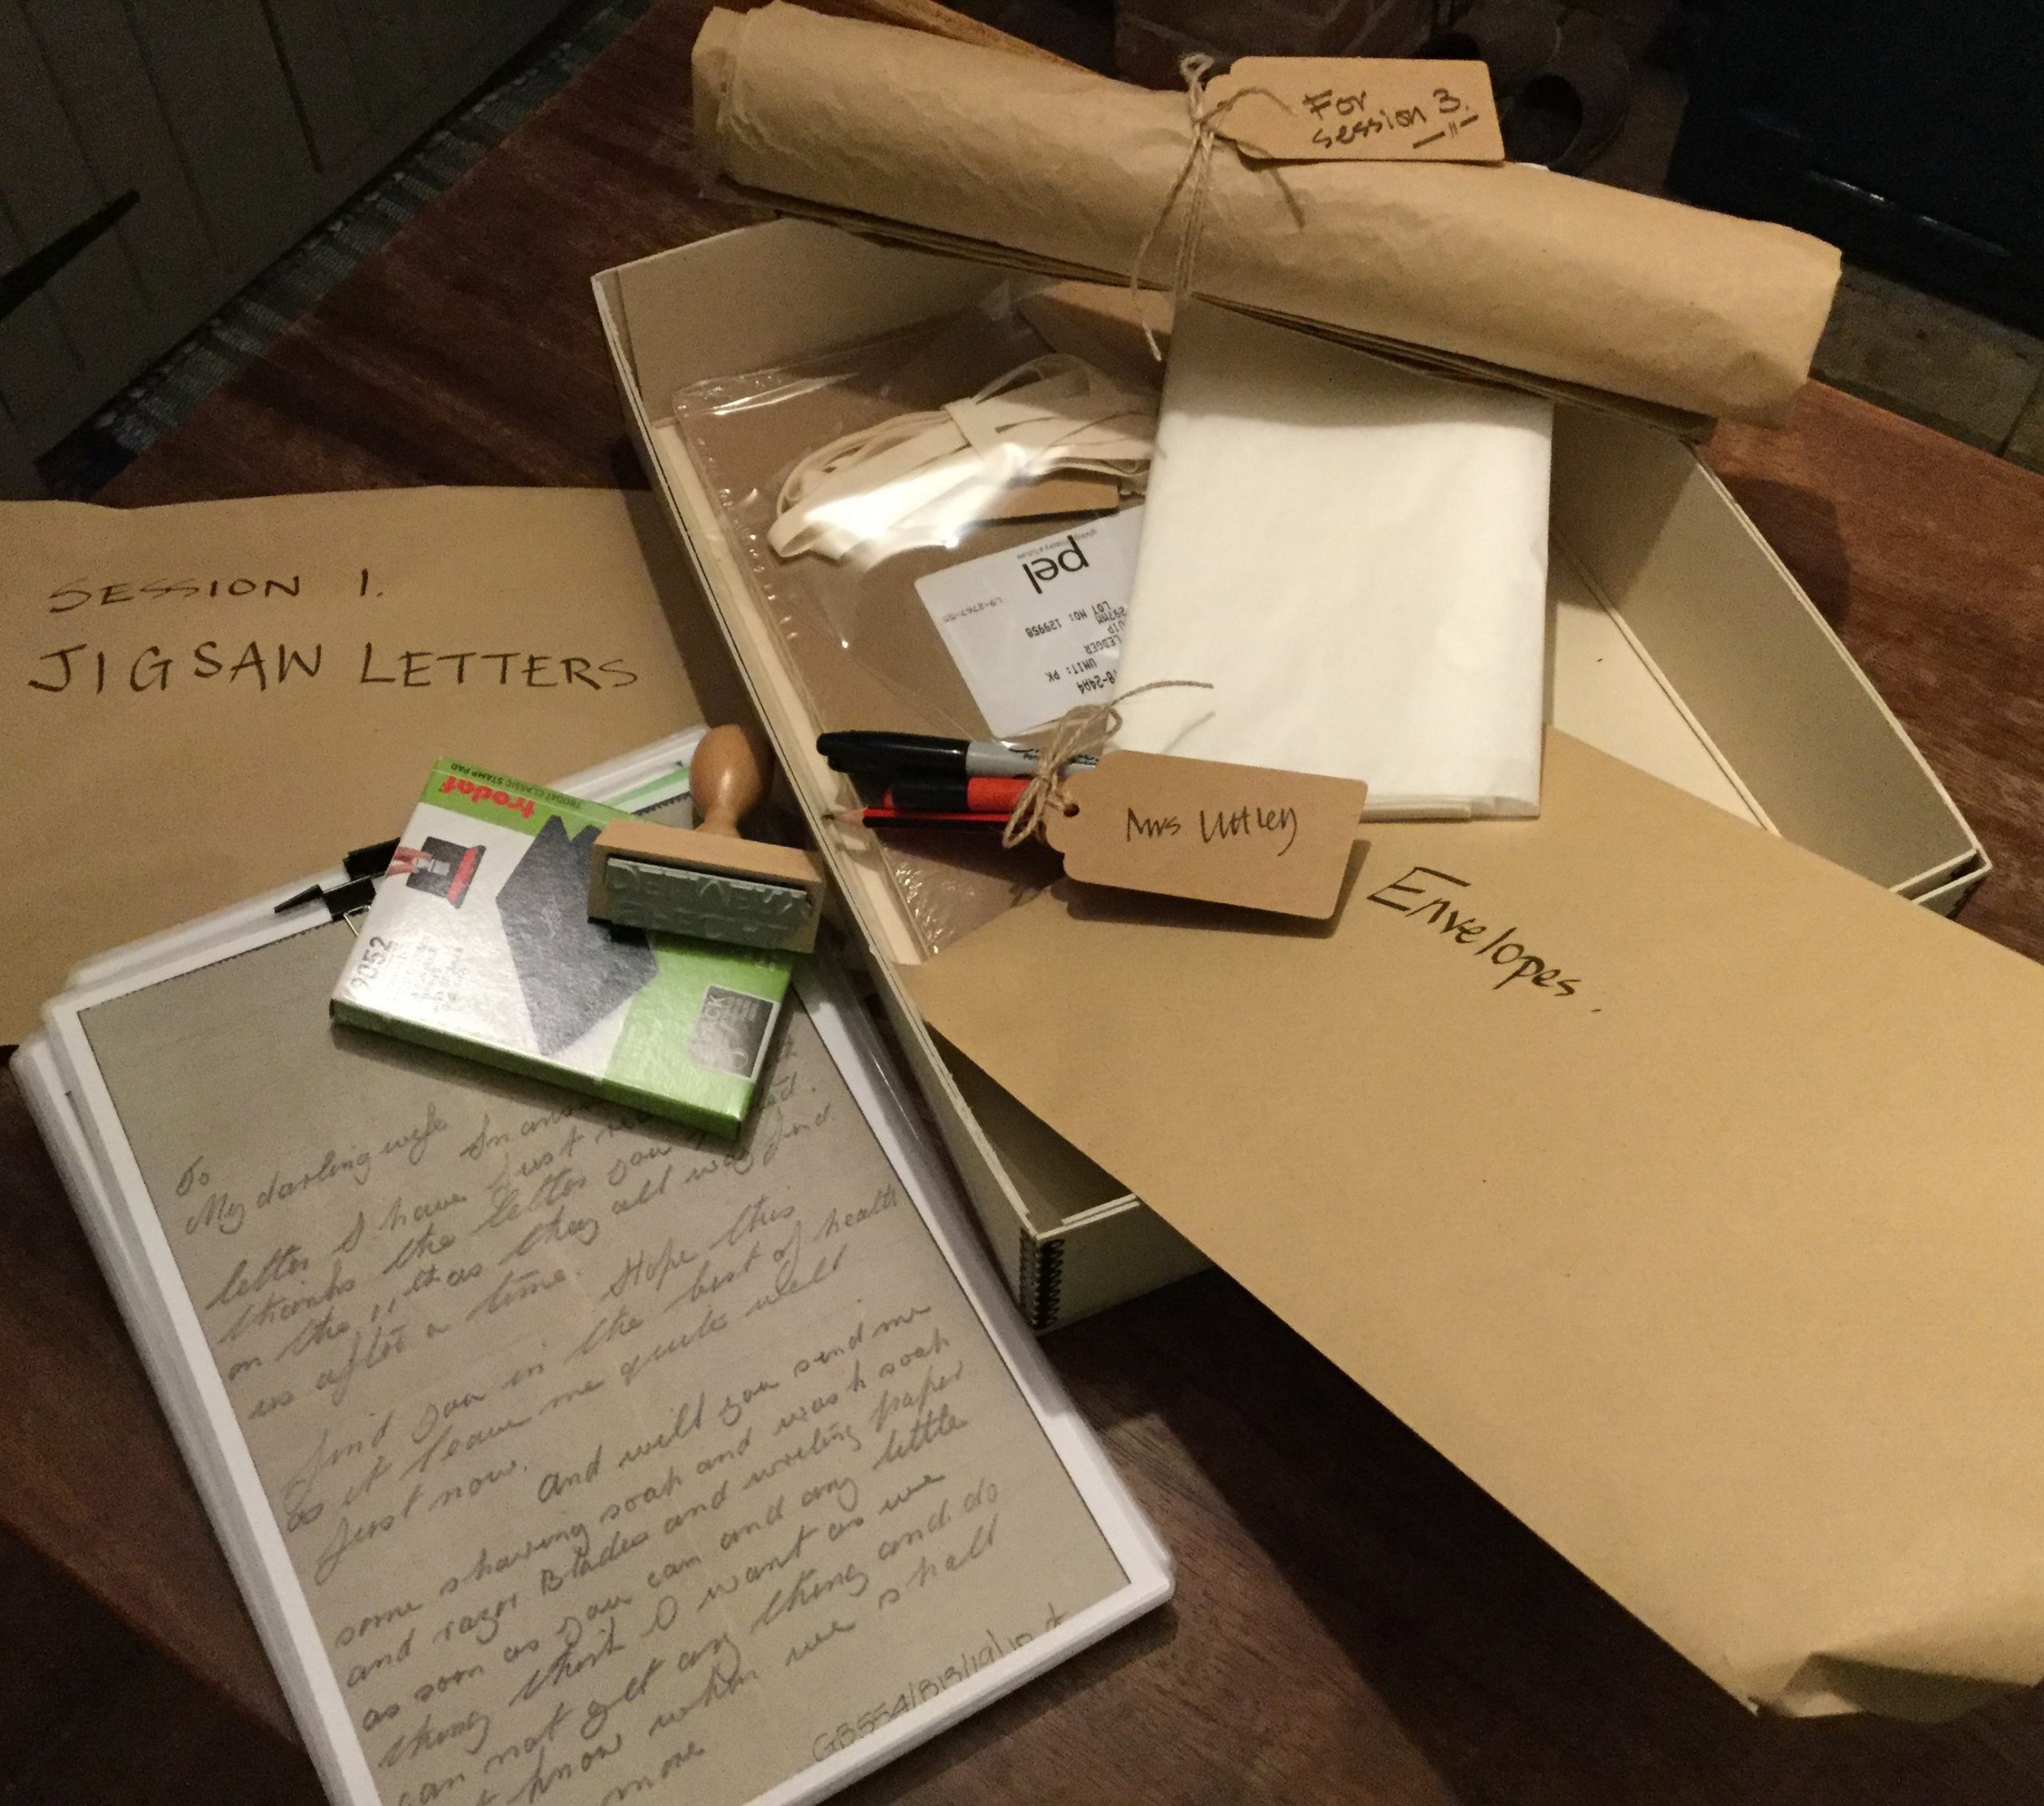 A collection of brown envelopes, pens and paper, plus a copy of a hand-written letter